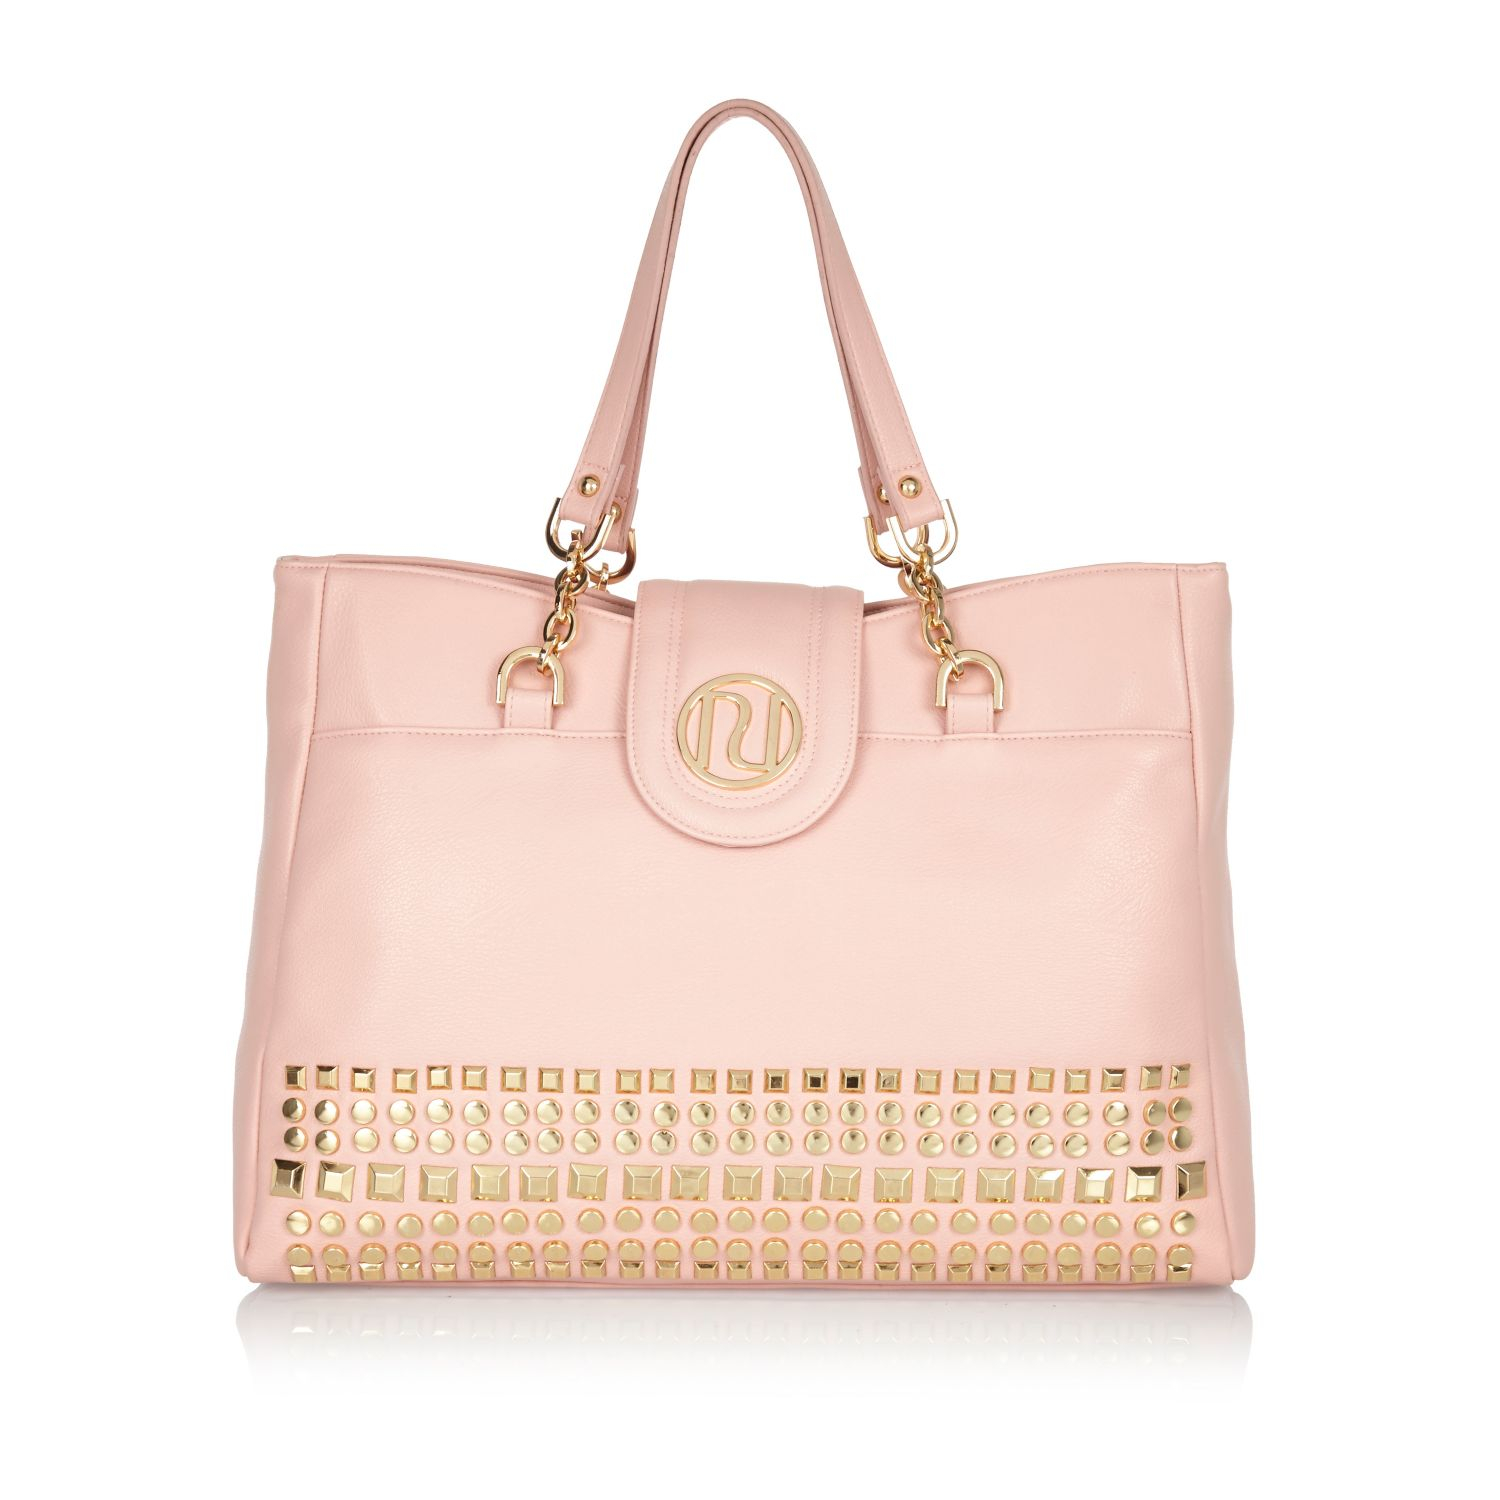 River Island Light Pink Studded Tote Bag in Pink Lyst